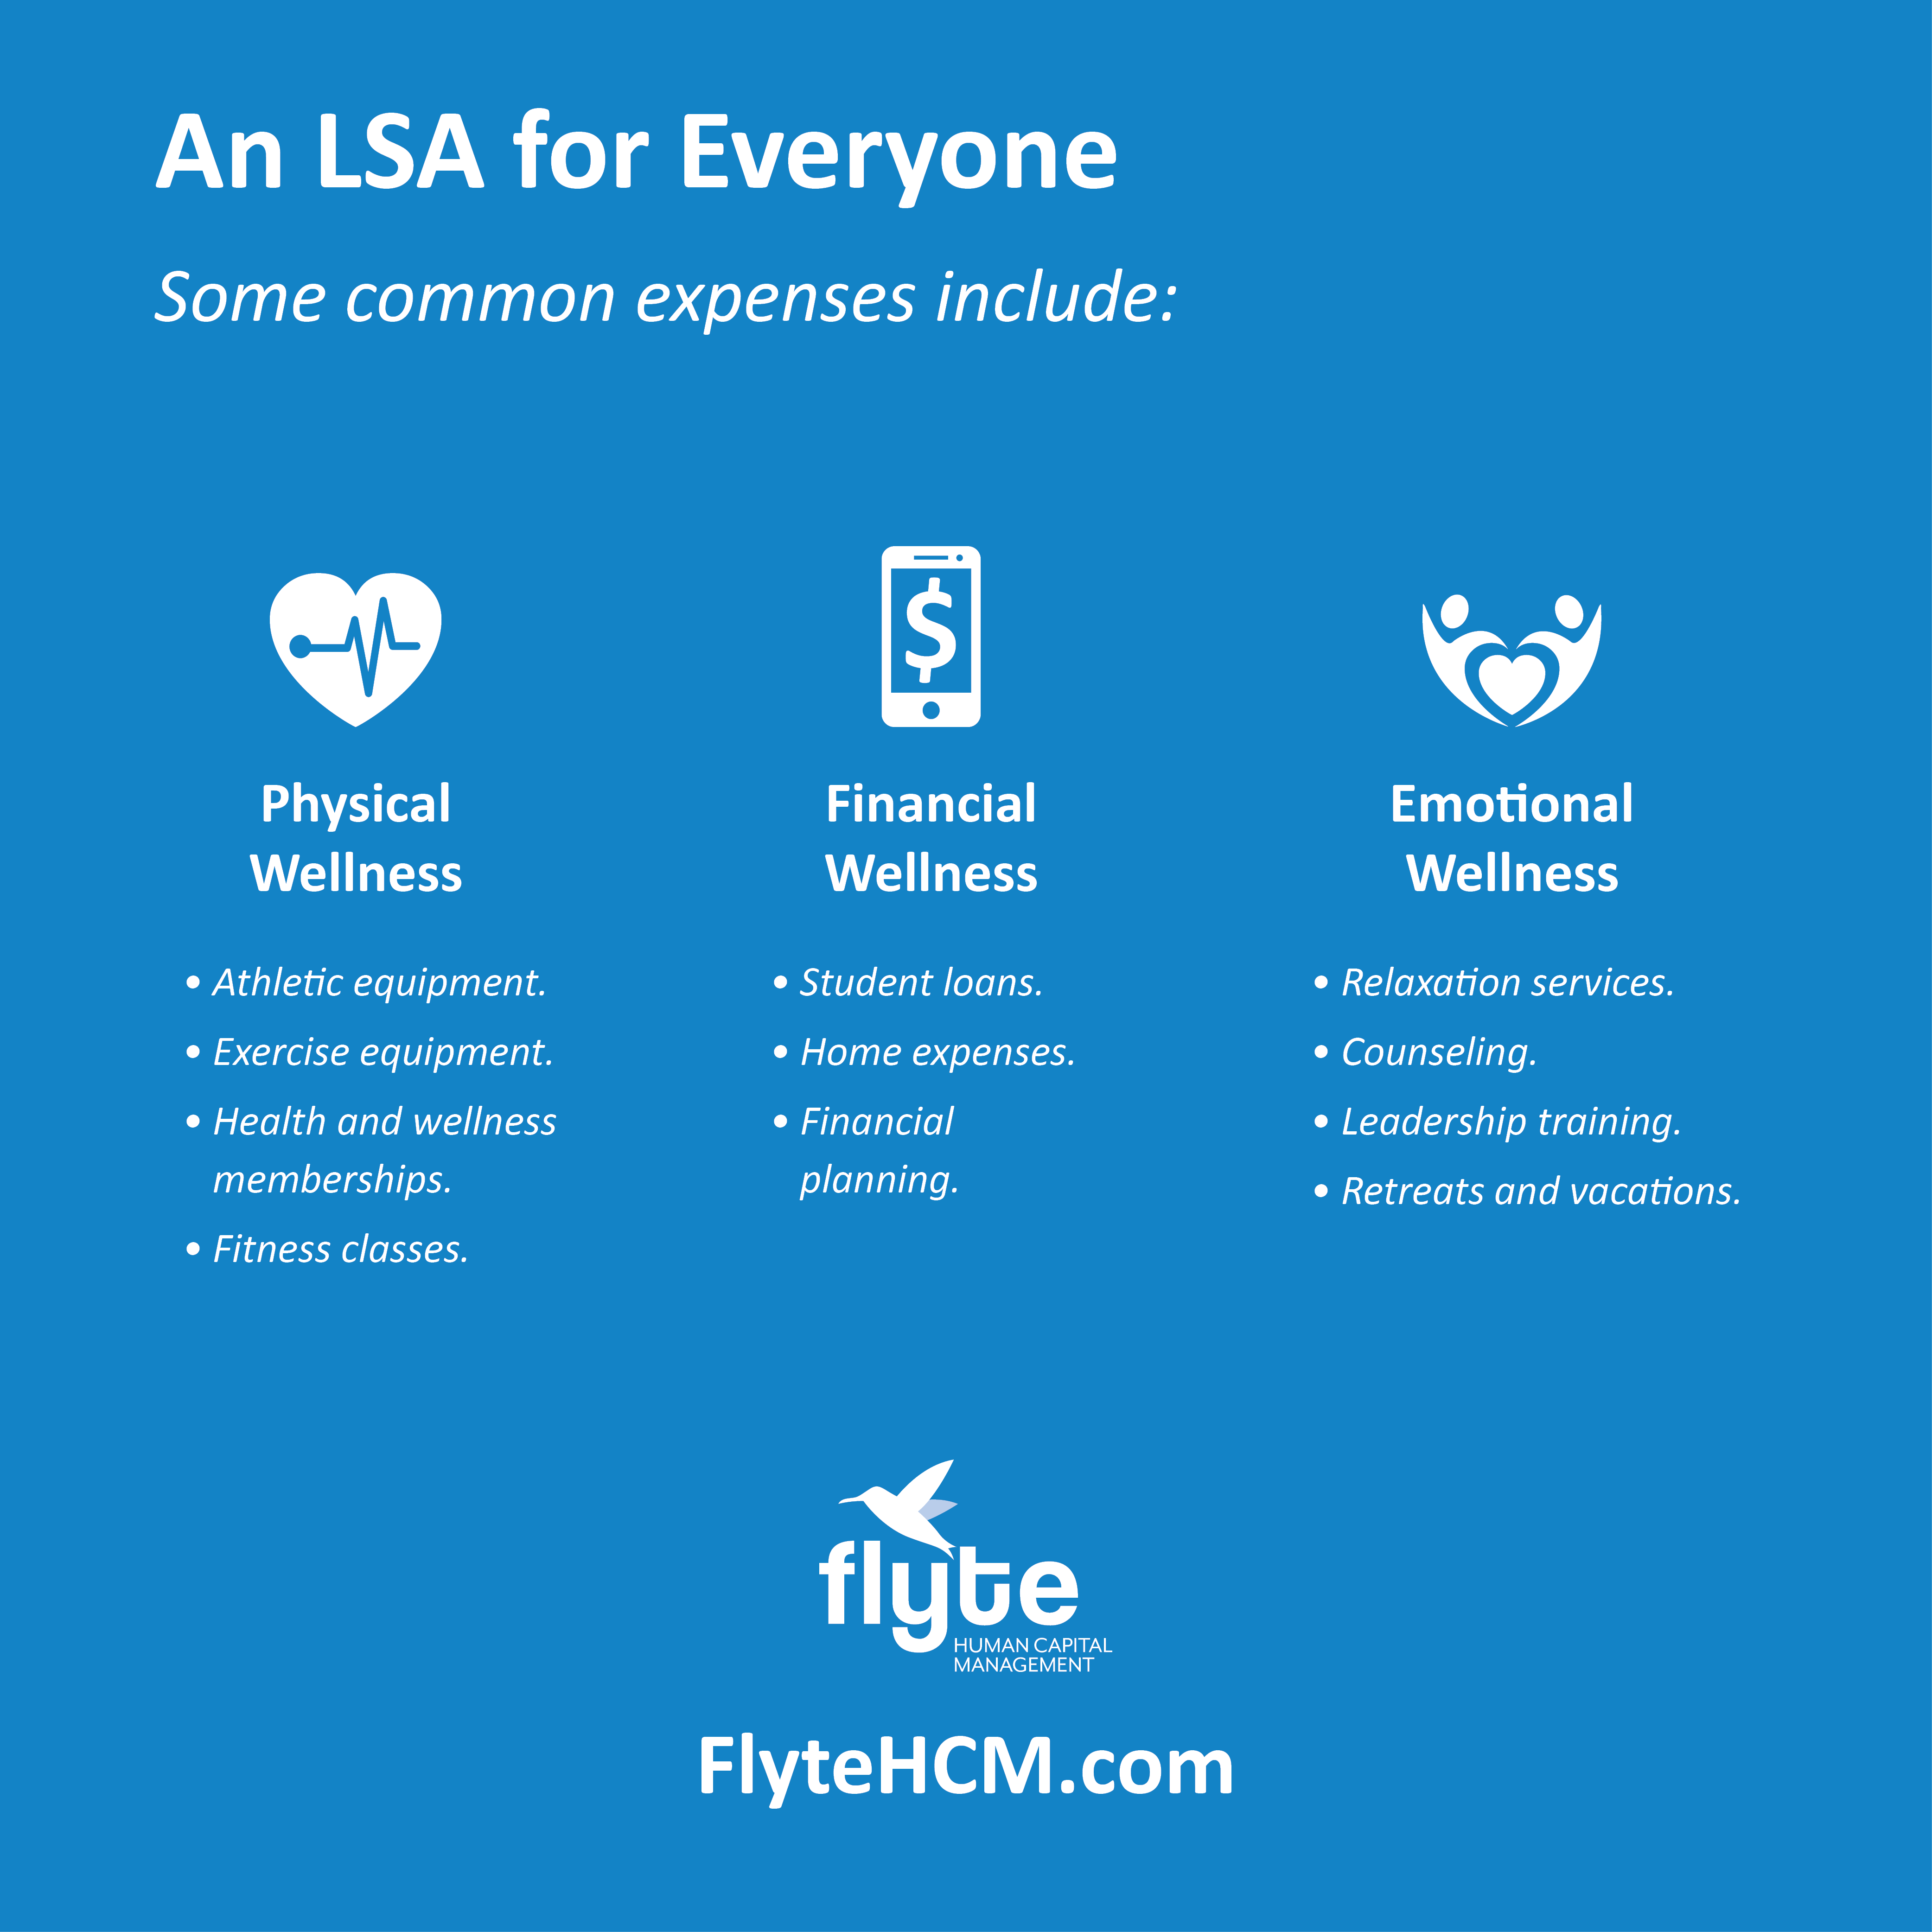 LSAs fit well for a variety of lifestyle needs